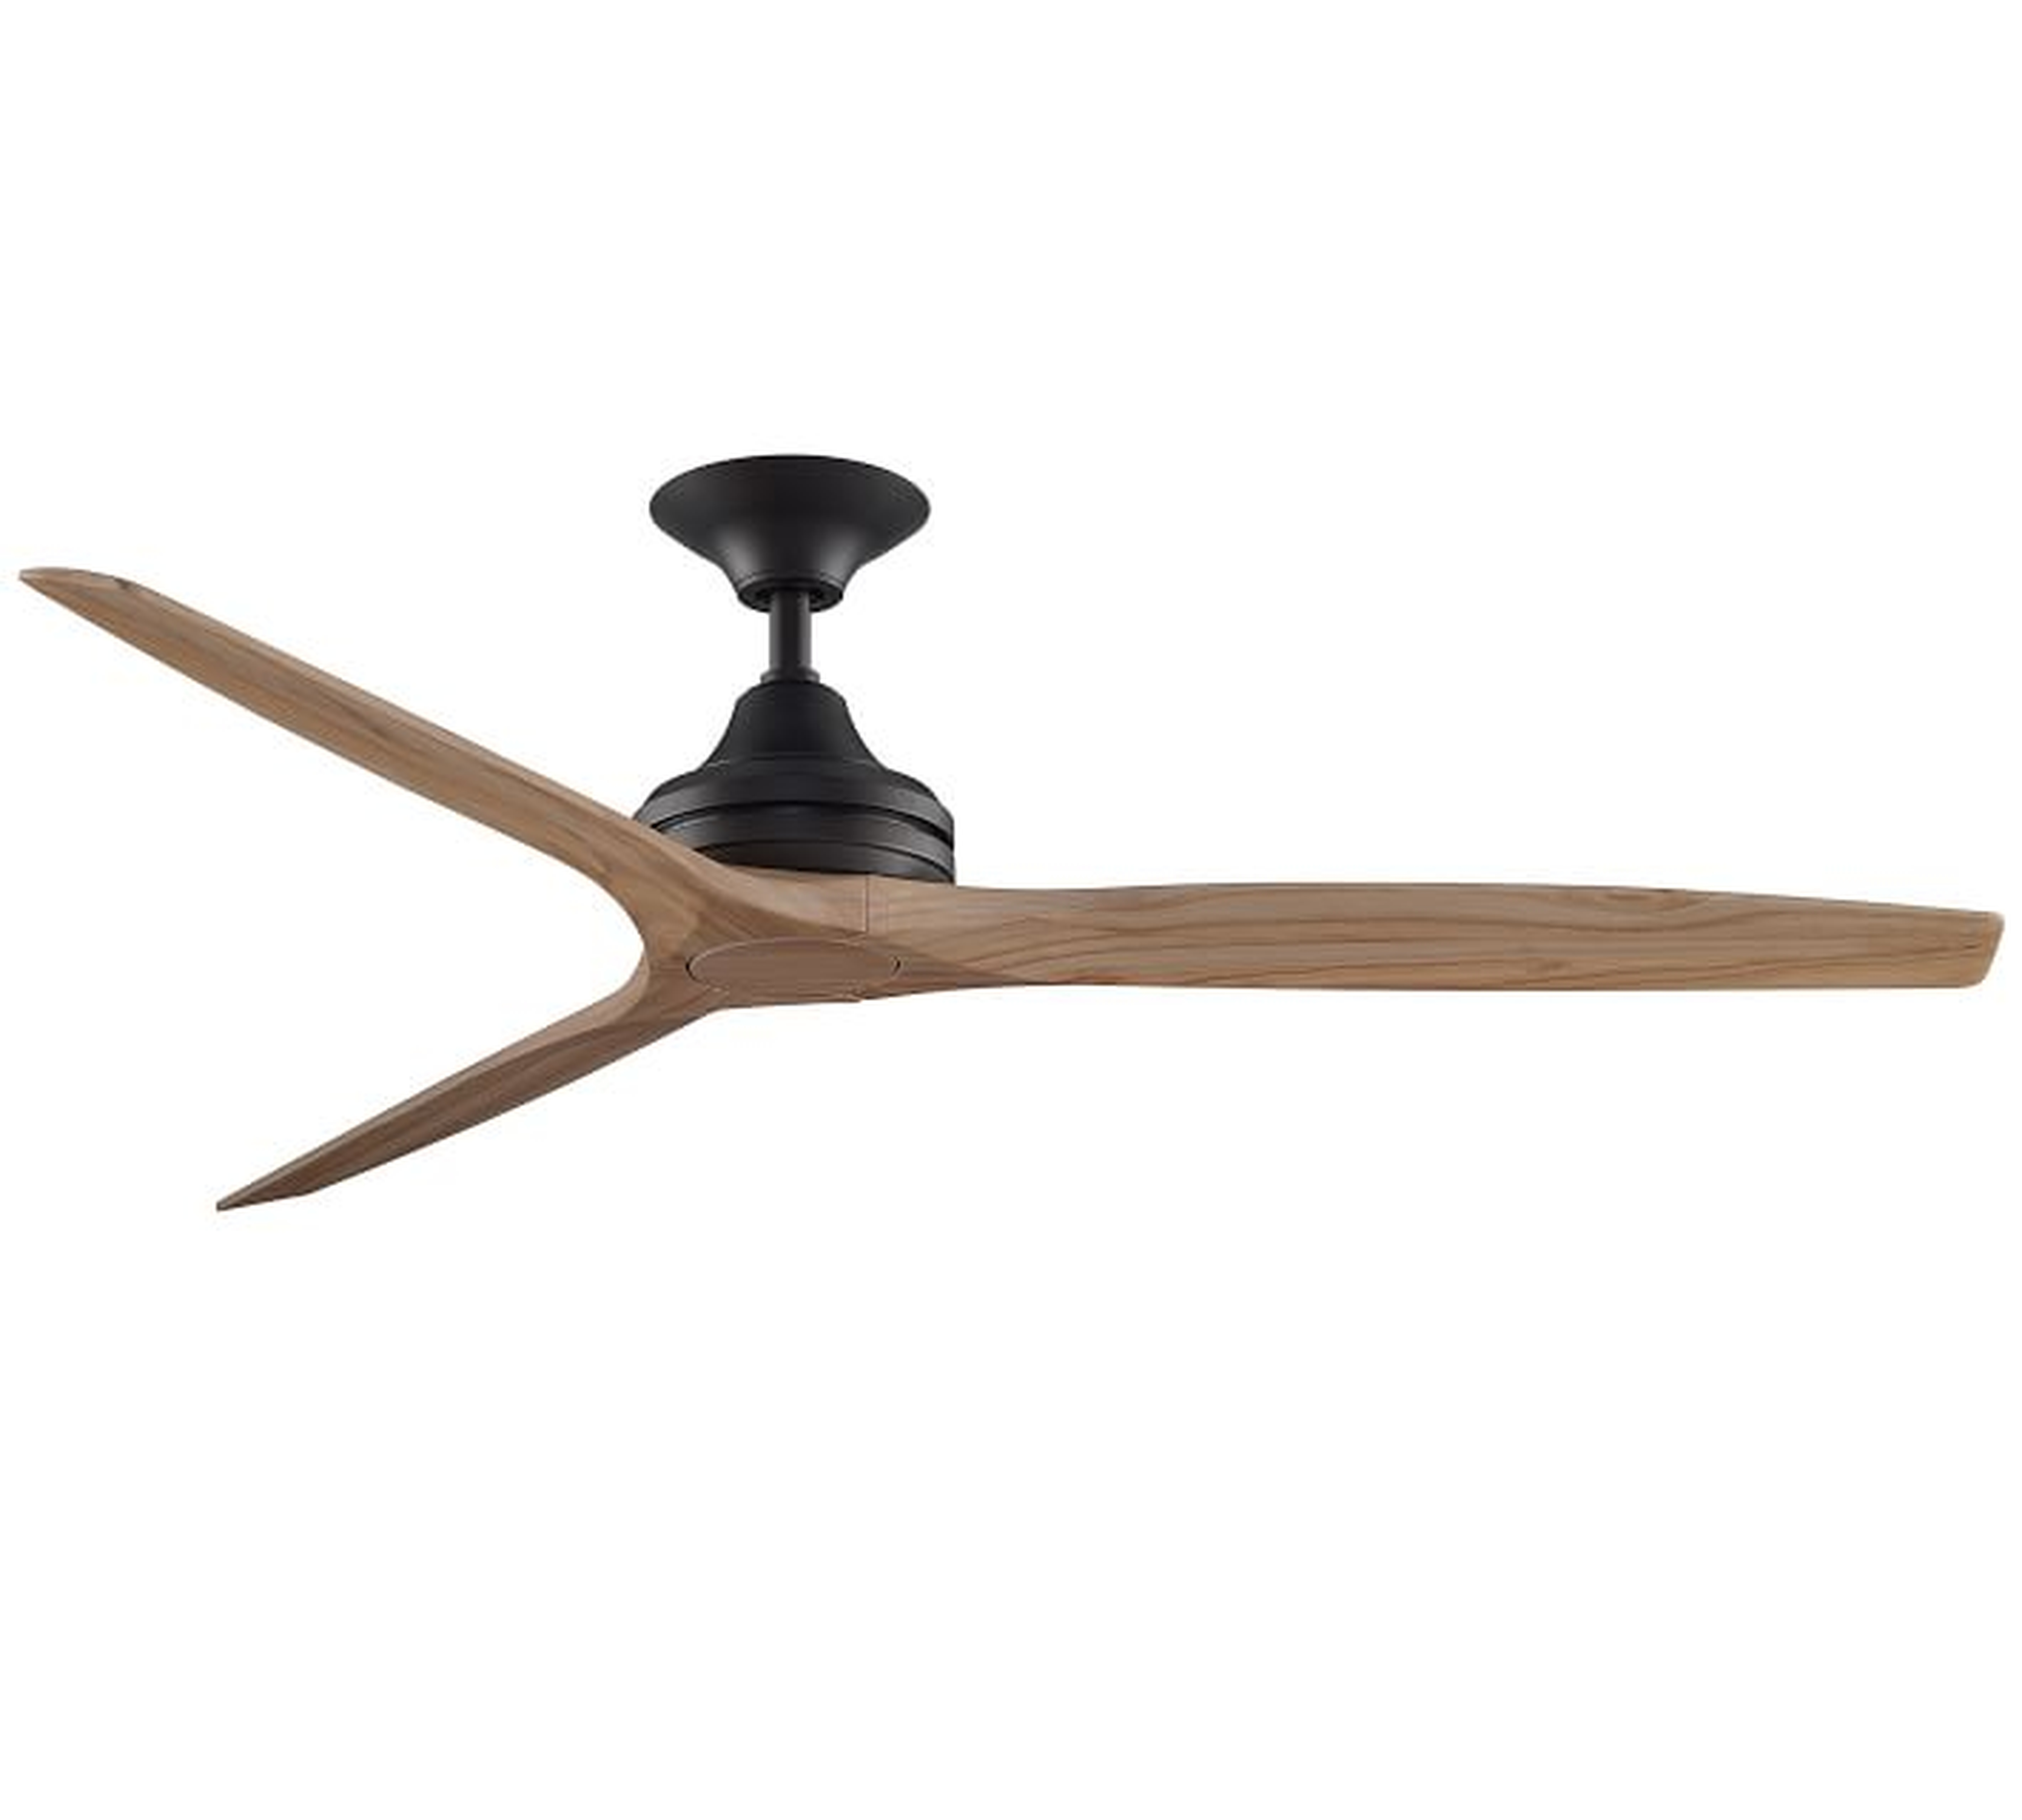 Spitfire Indoor/Outdoor Ceiling Fan, Driftwood with Driftwood Blades - Pottery Barn